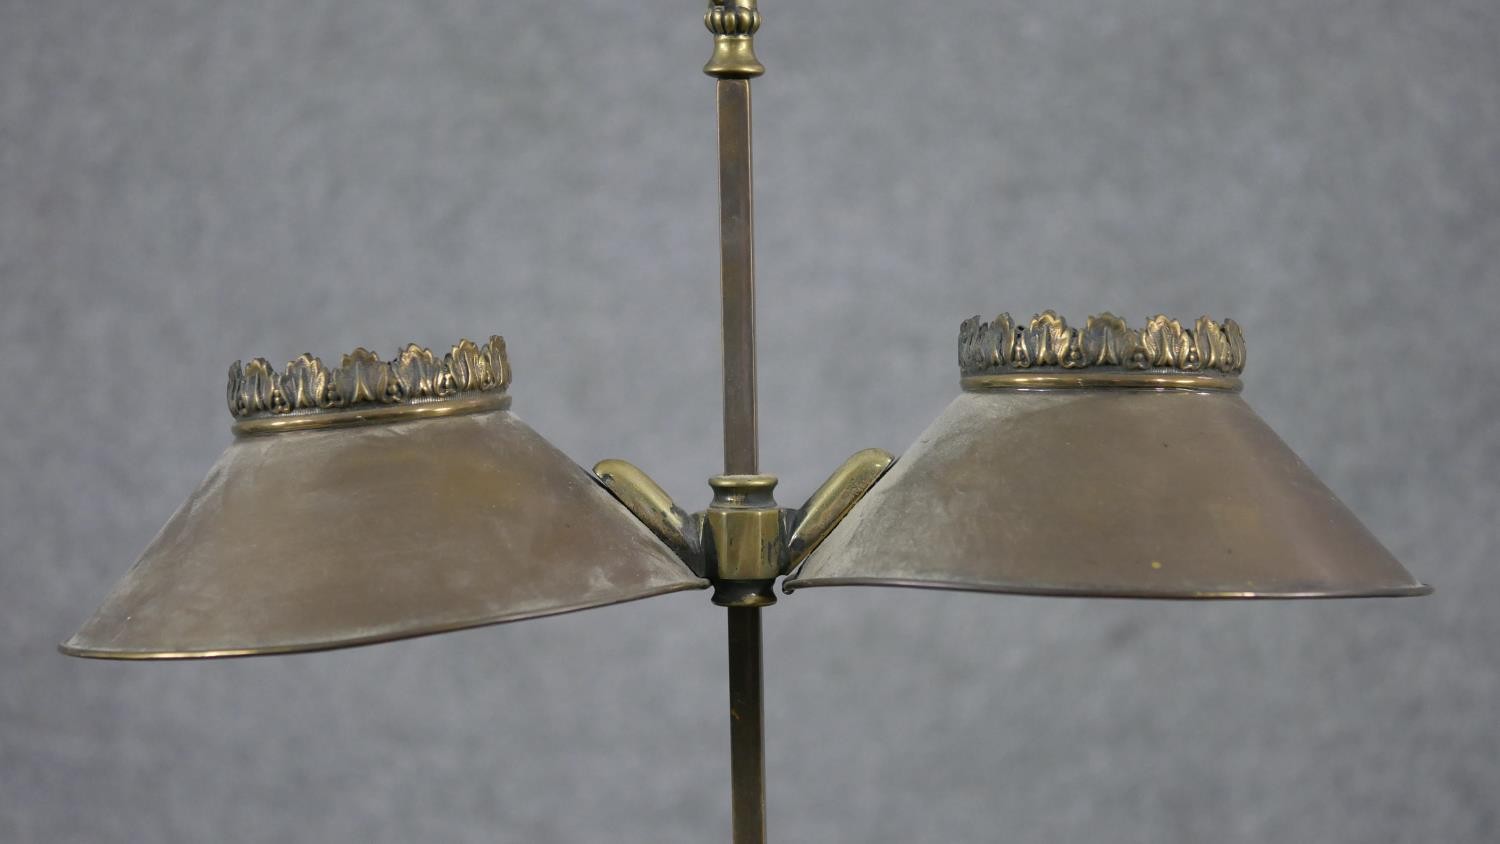 A 19th century brass double rise and fall student's candle lamp with scrolled arm supports. H.49 W. - Image 2 of 8